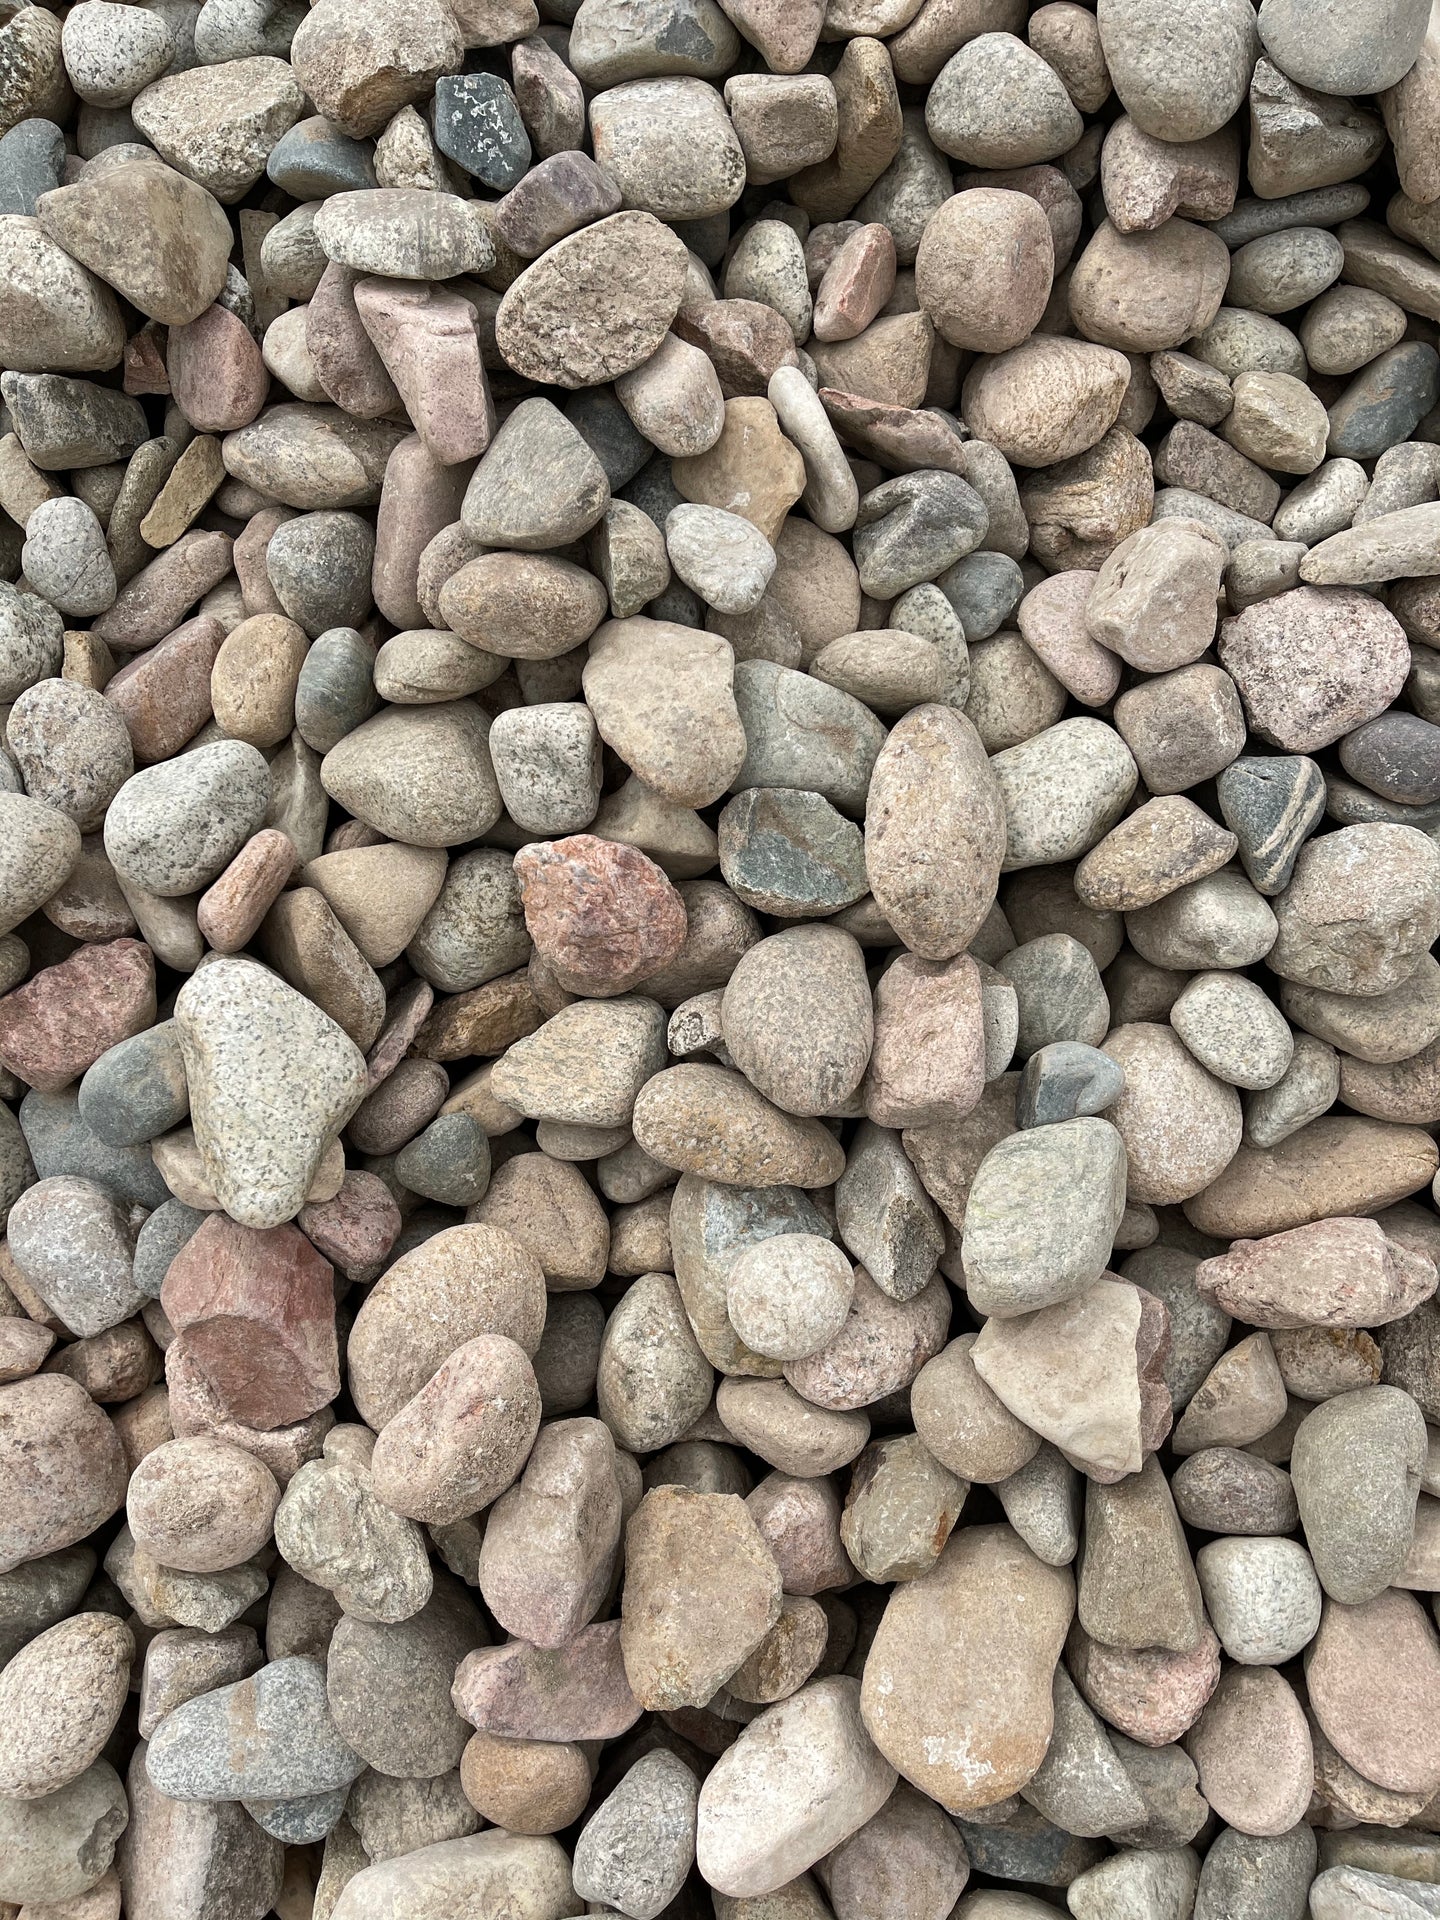 PGN 40 River Rocks - 2-4 Inches